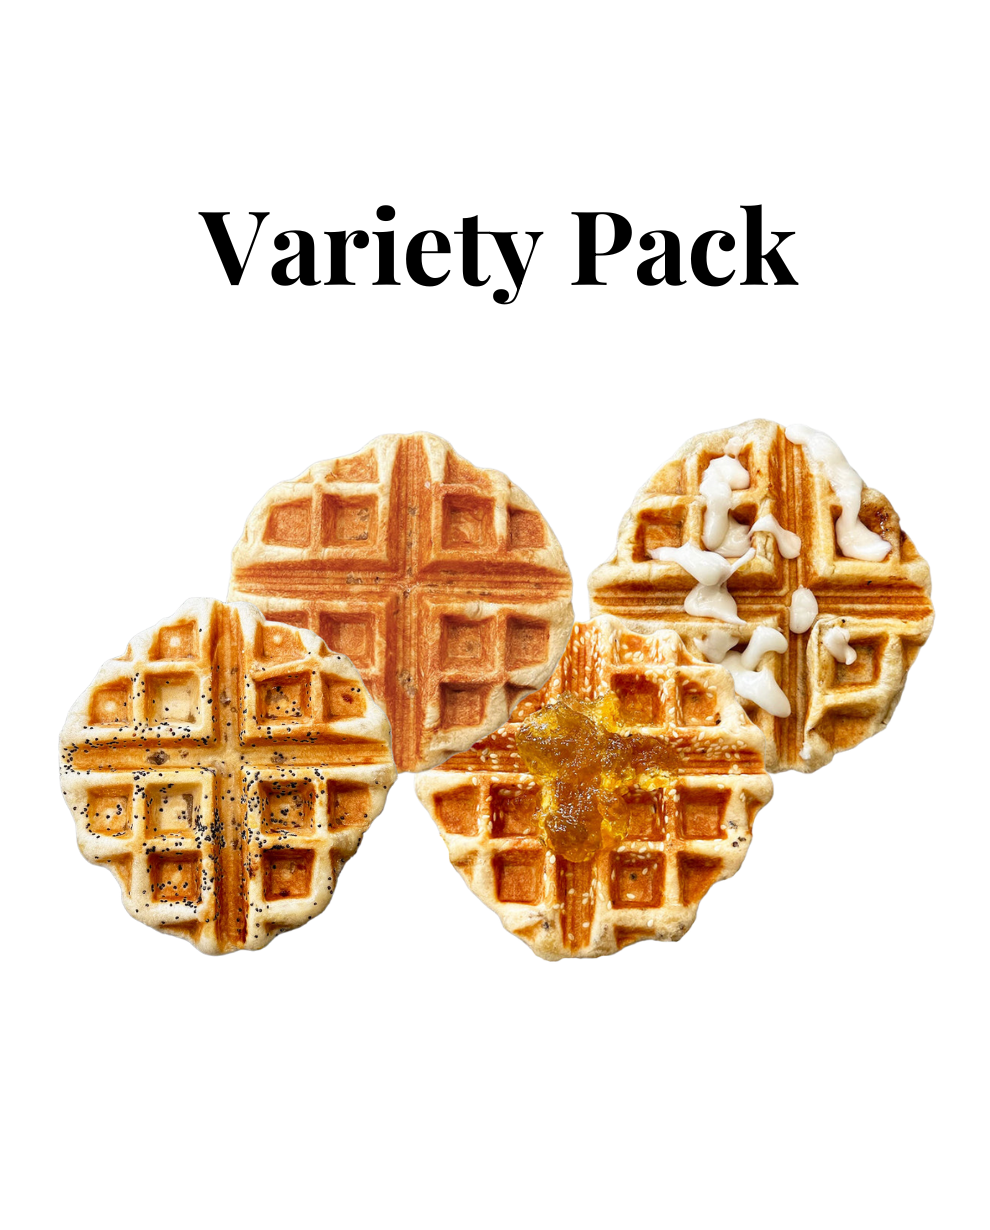 Variety Pack | All Four Flavors - 12 Pack